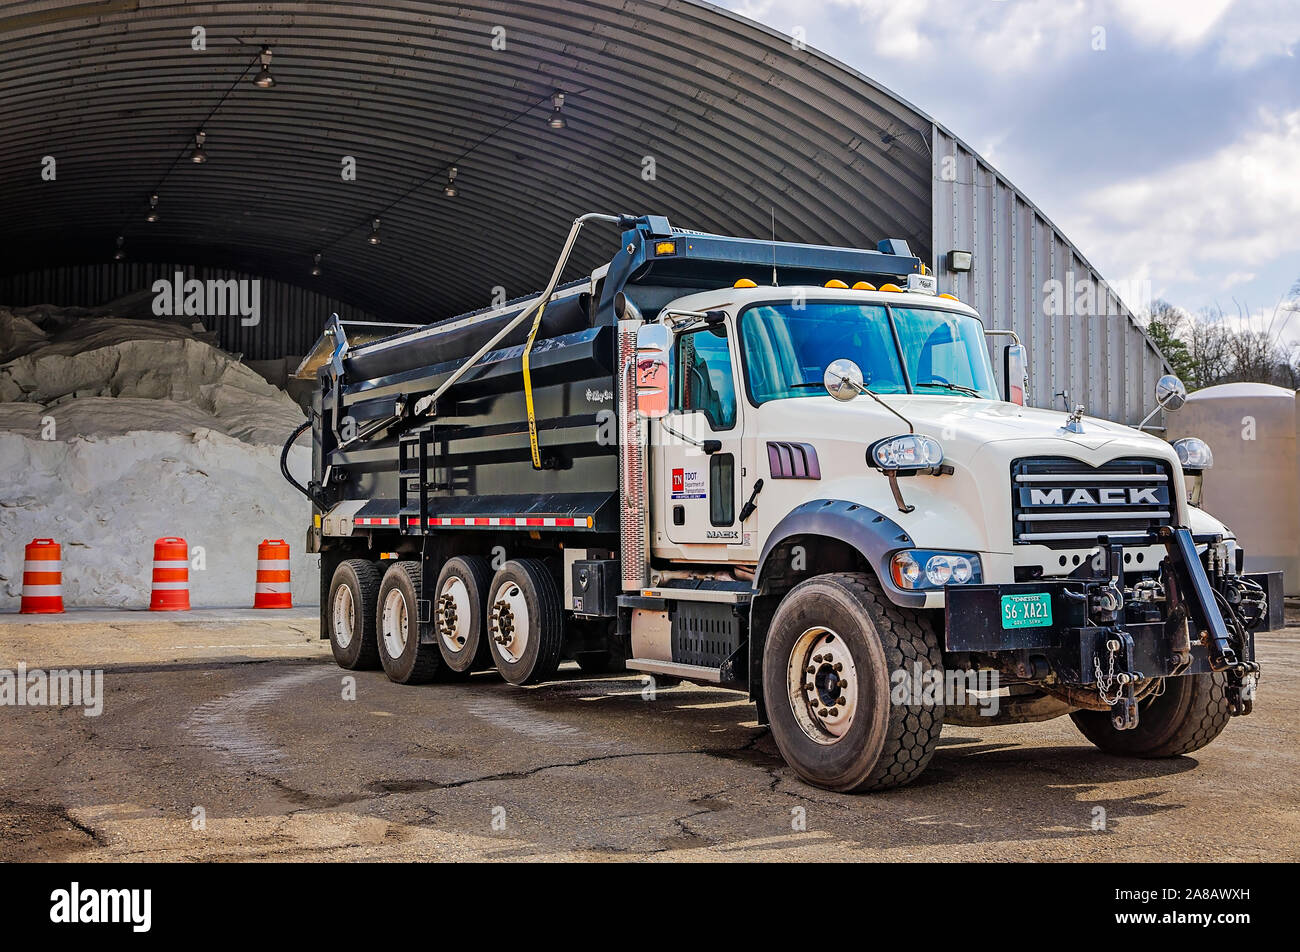 A Mack Granite truck waits to be loaded with salt at the Tennessee Department of Transportation’s salt barns, March 13, 2018, in Knoxville, Tennessee. Stock Photo